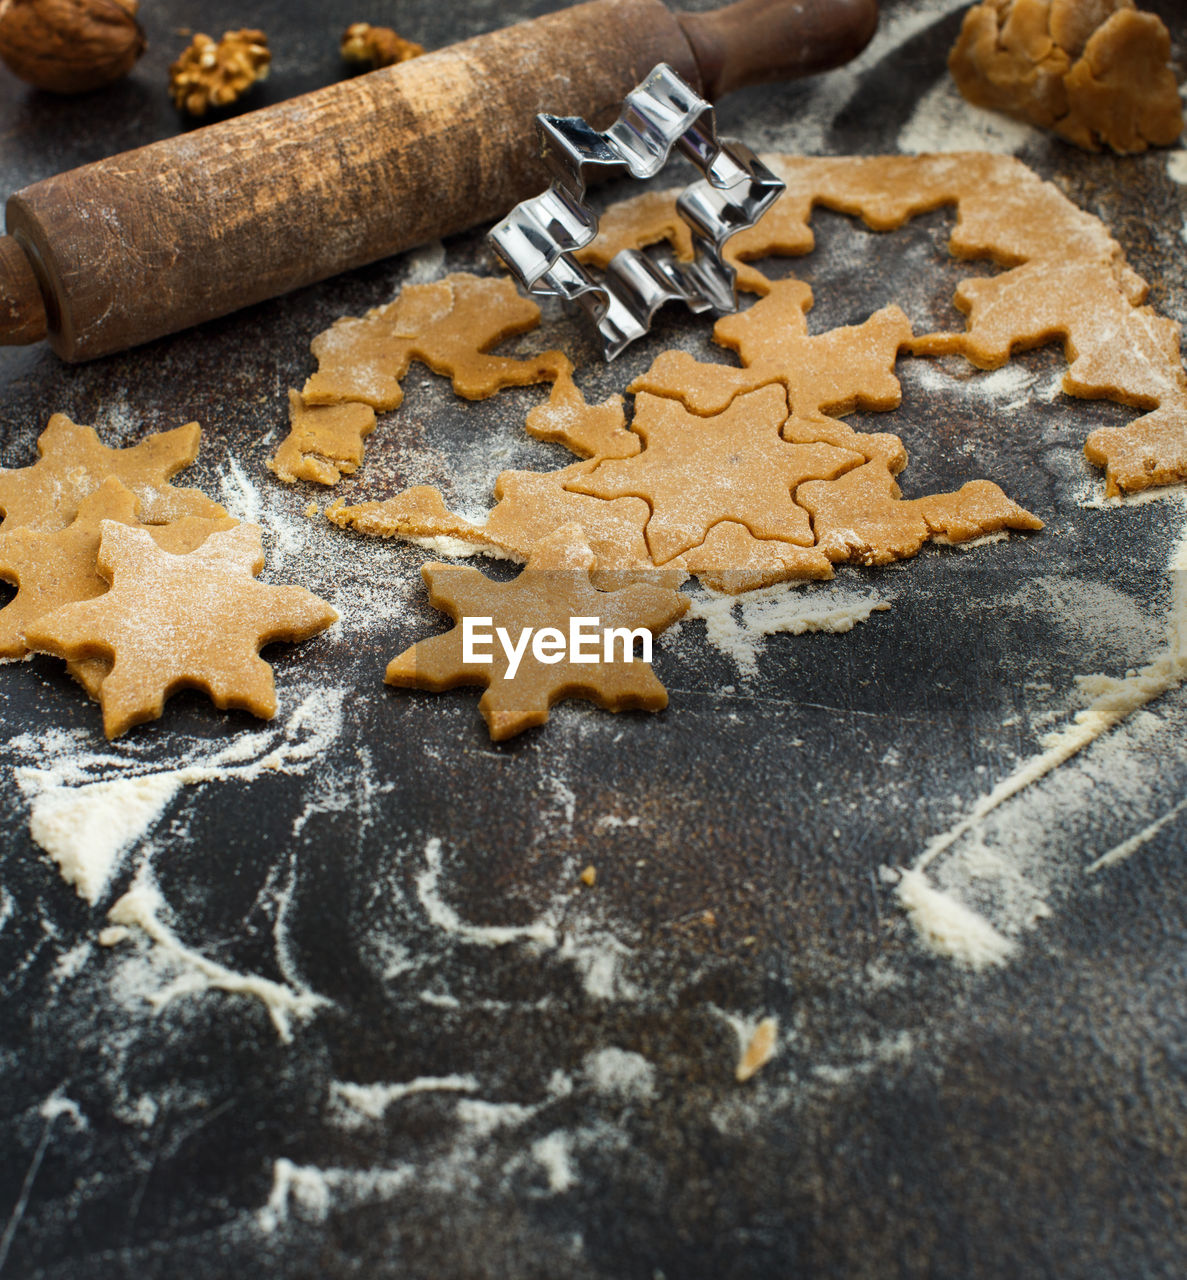 HIGH ANGLE VIEW OF COOKIES ON FALLEN